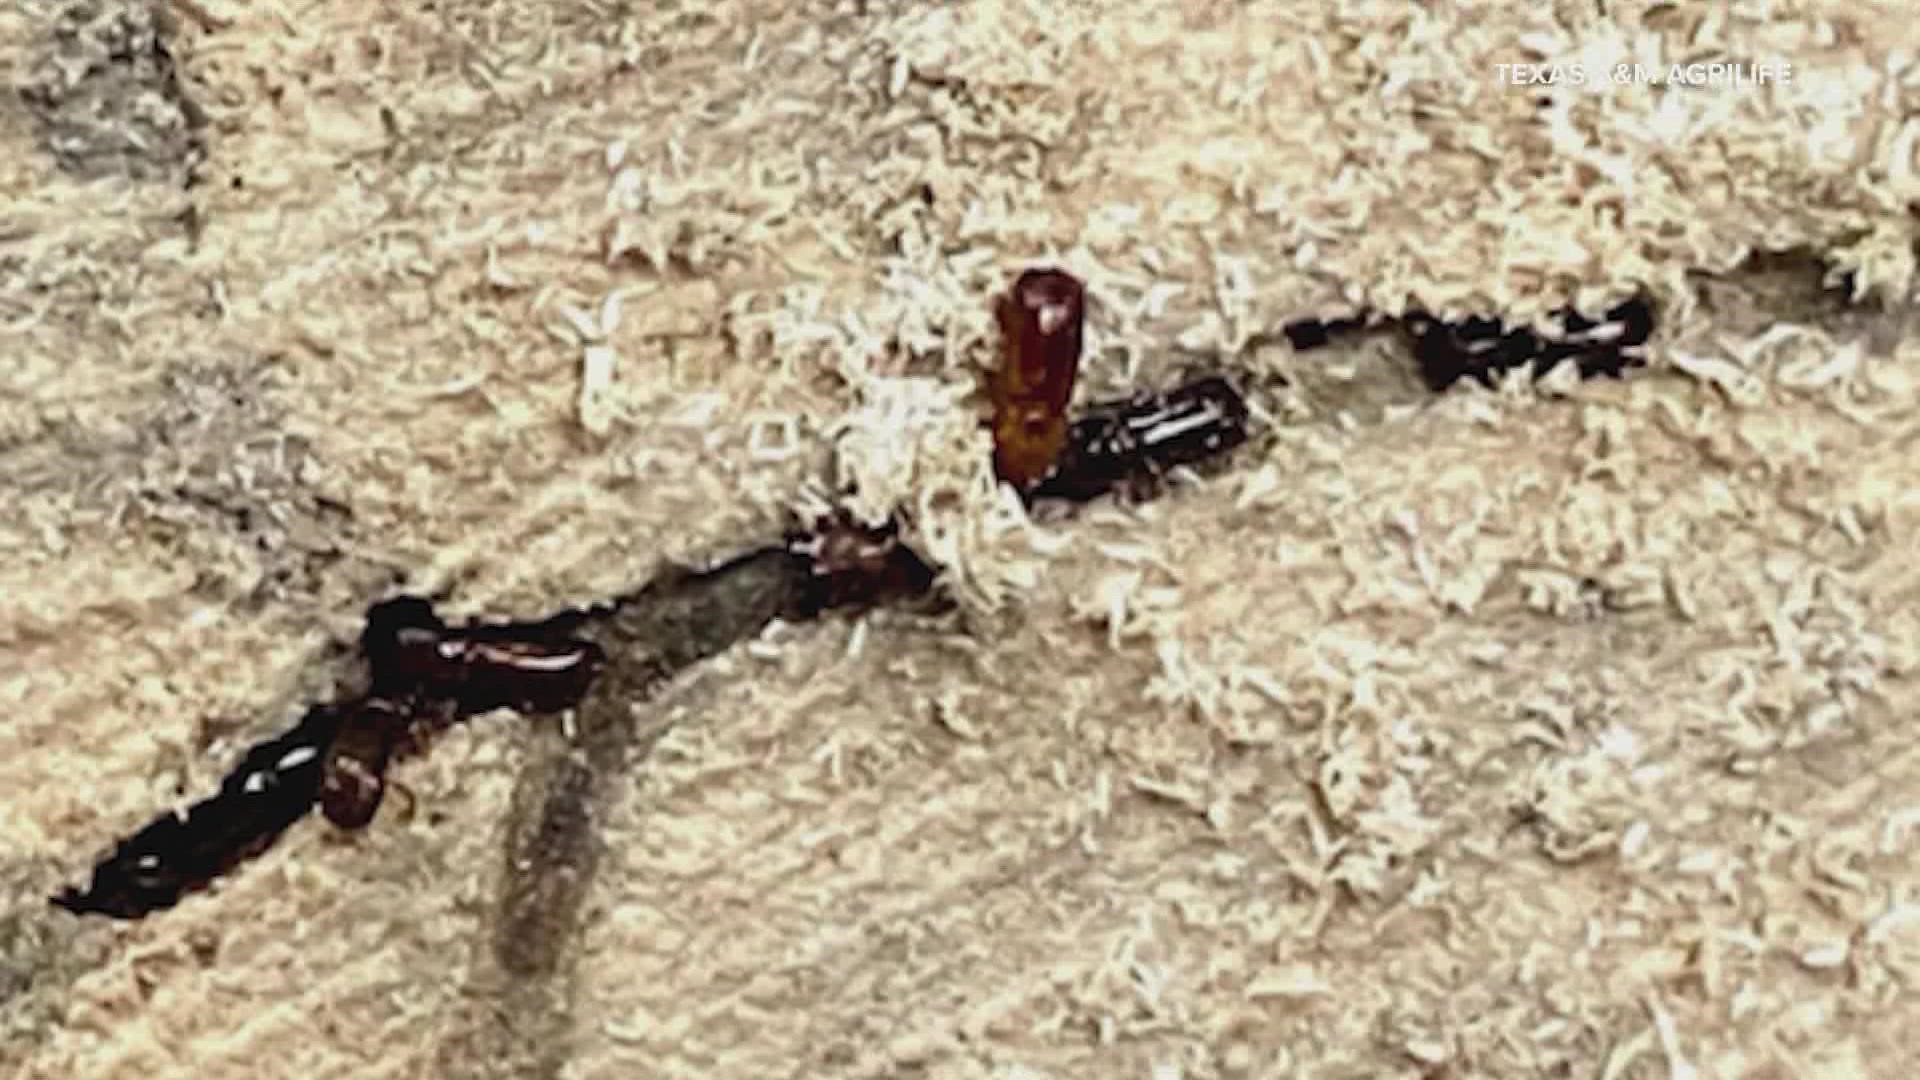 Texas A&M is tracking a disease called Laurel Wilt that is spread through a beetle. Researchers say there is no cure and most trees die in a year.